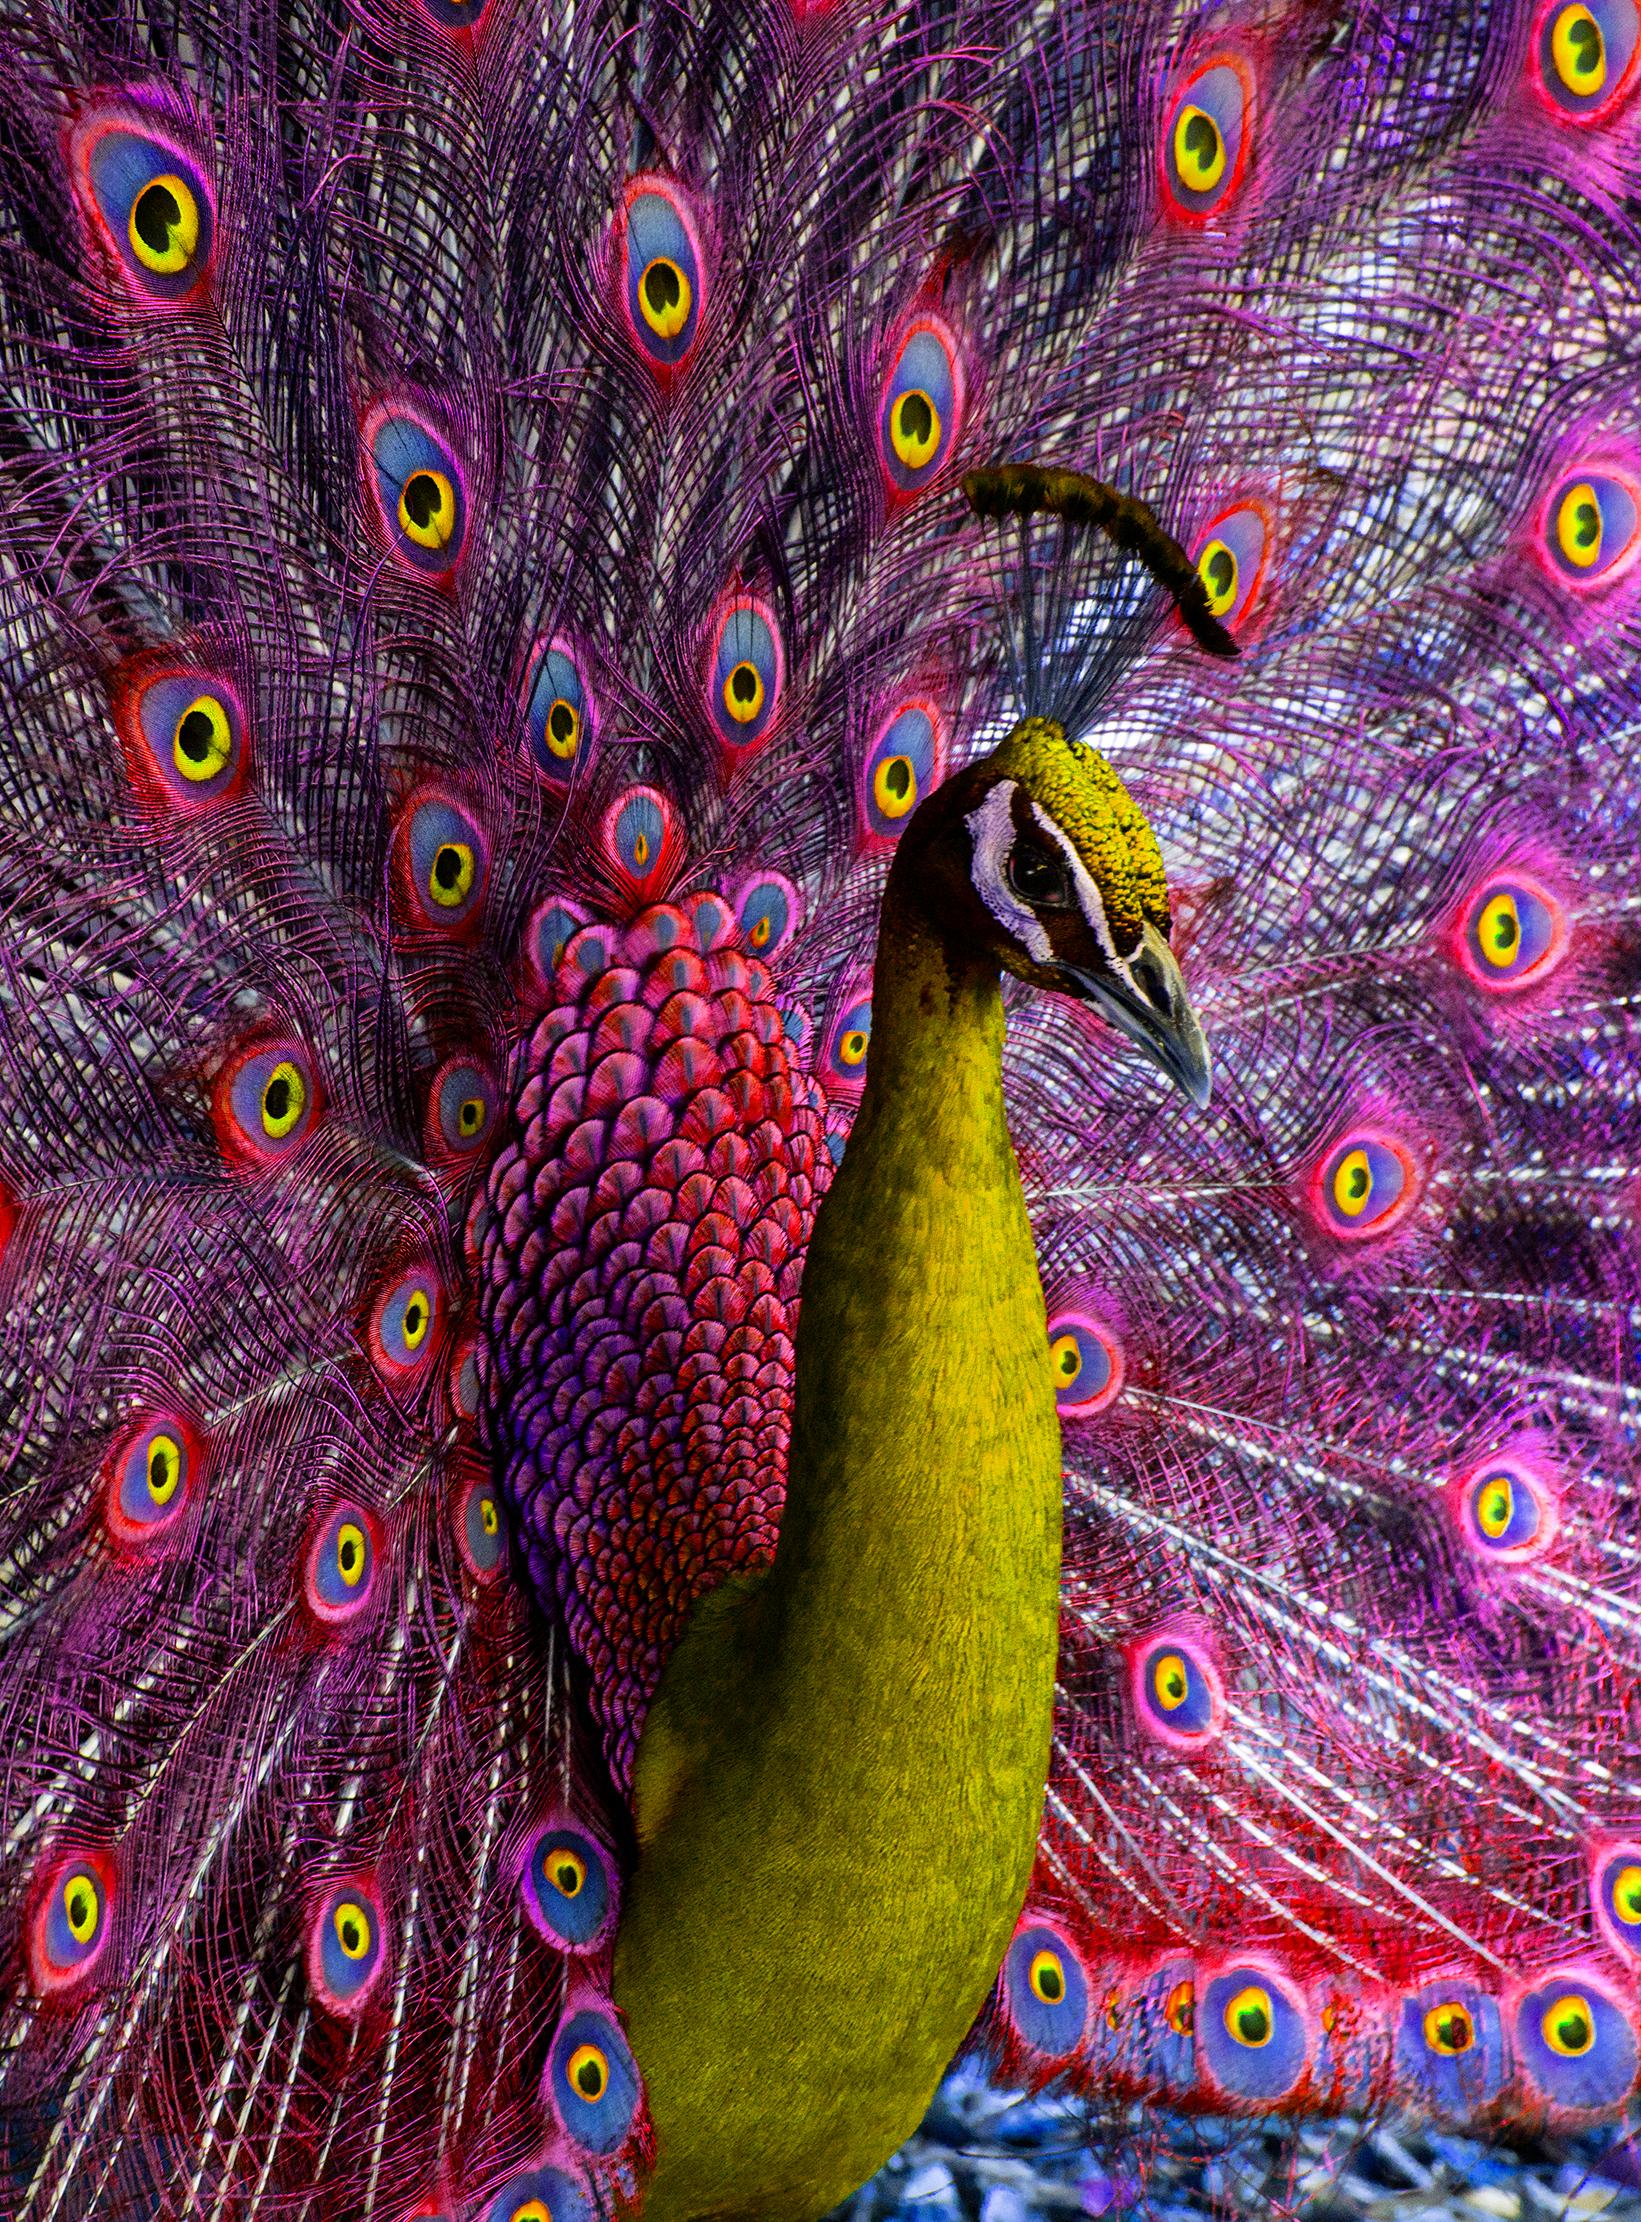 Peacock displaying in Magenta and Yellow Birds - Photograph by Robert Funk